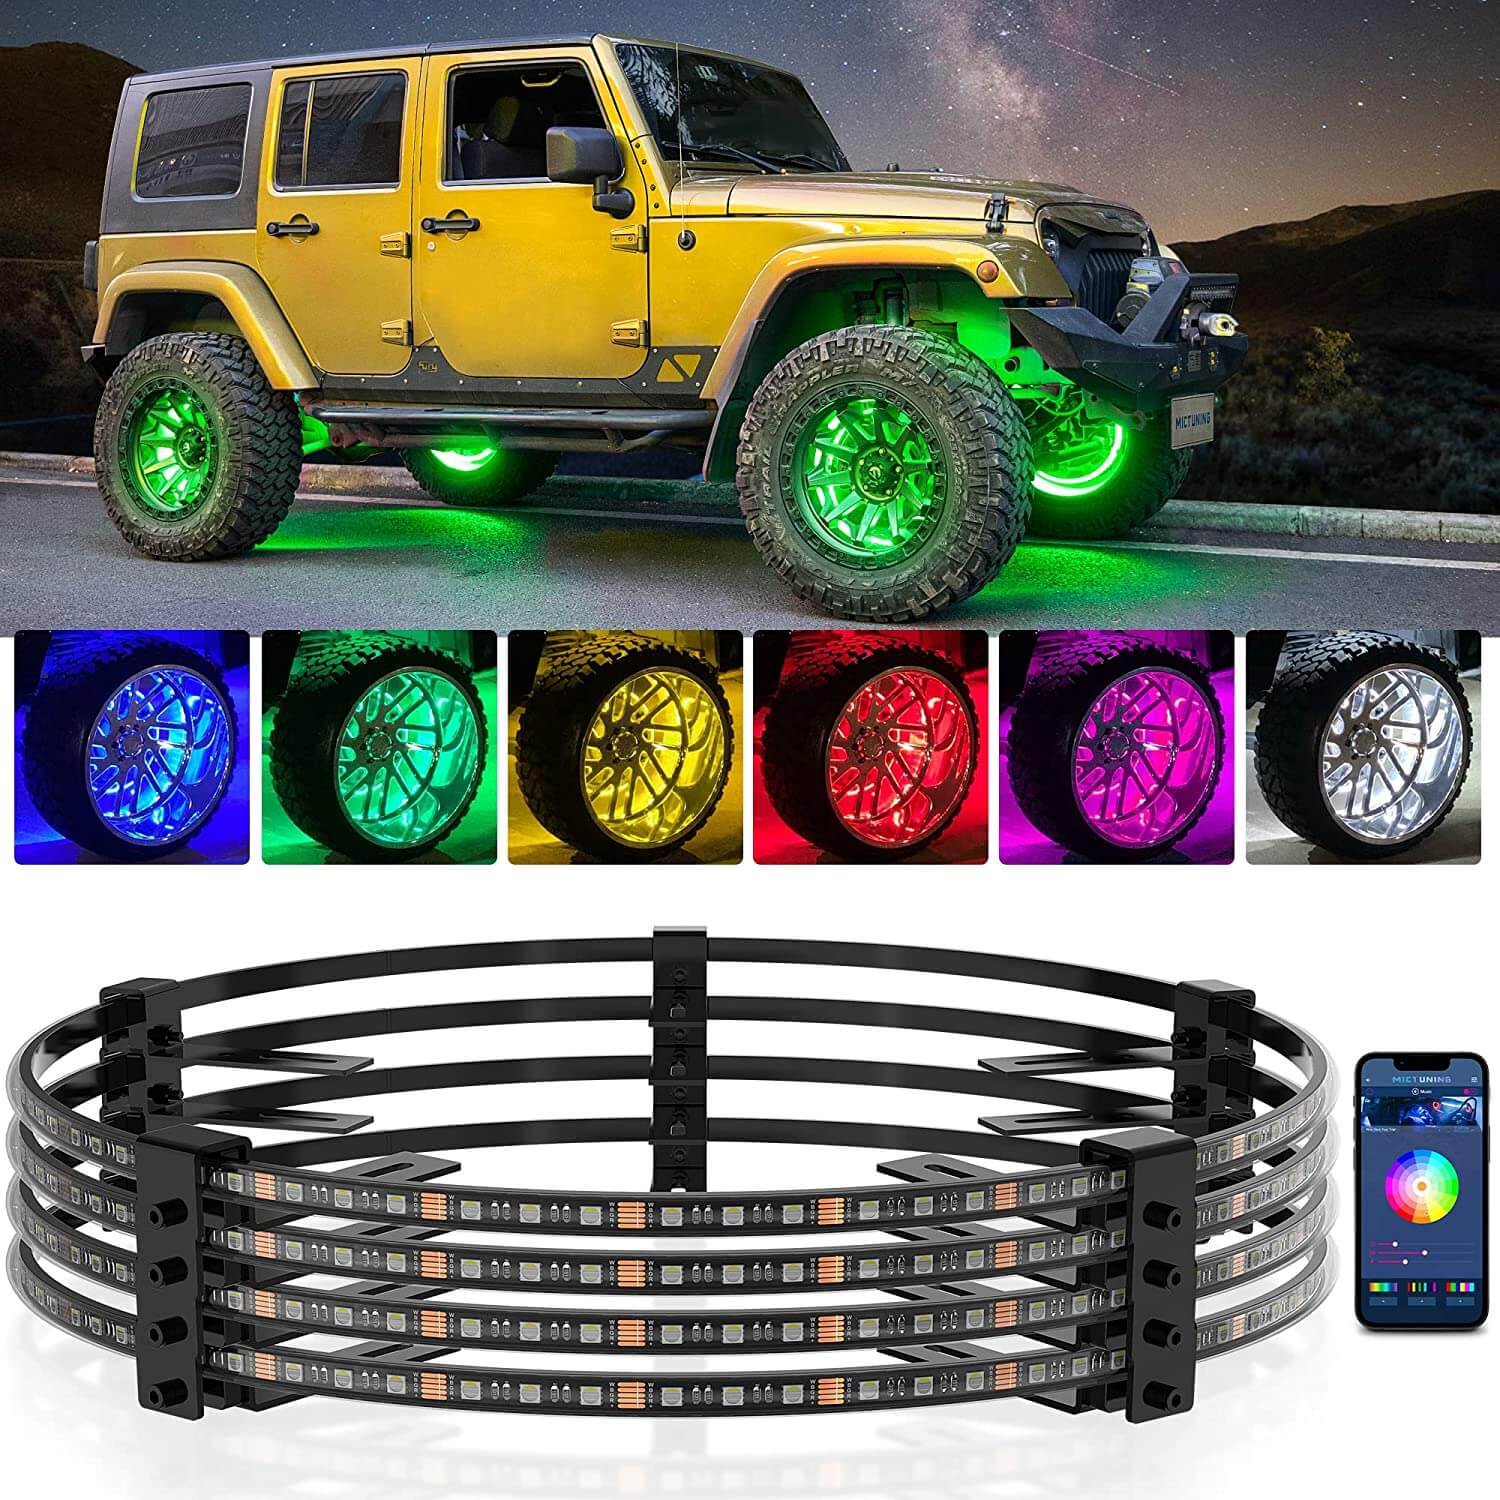 Exclusive Luxury Three-Piece RGBW Collection 1, C2 8 Pods Rock Lights, 15.5" Wheel Ring Lights and S1 3" LED Pod Light